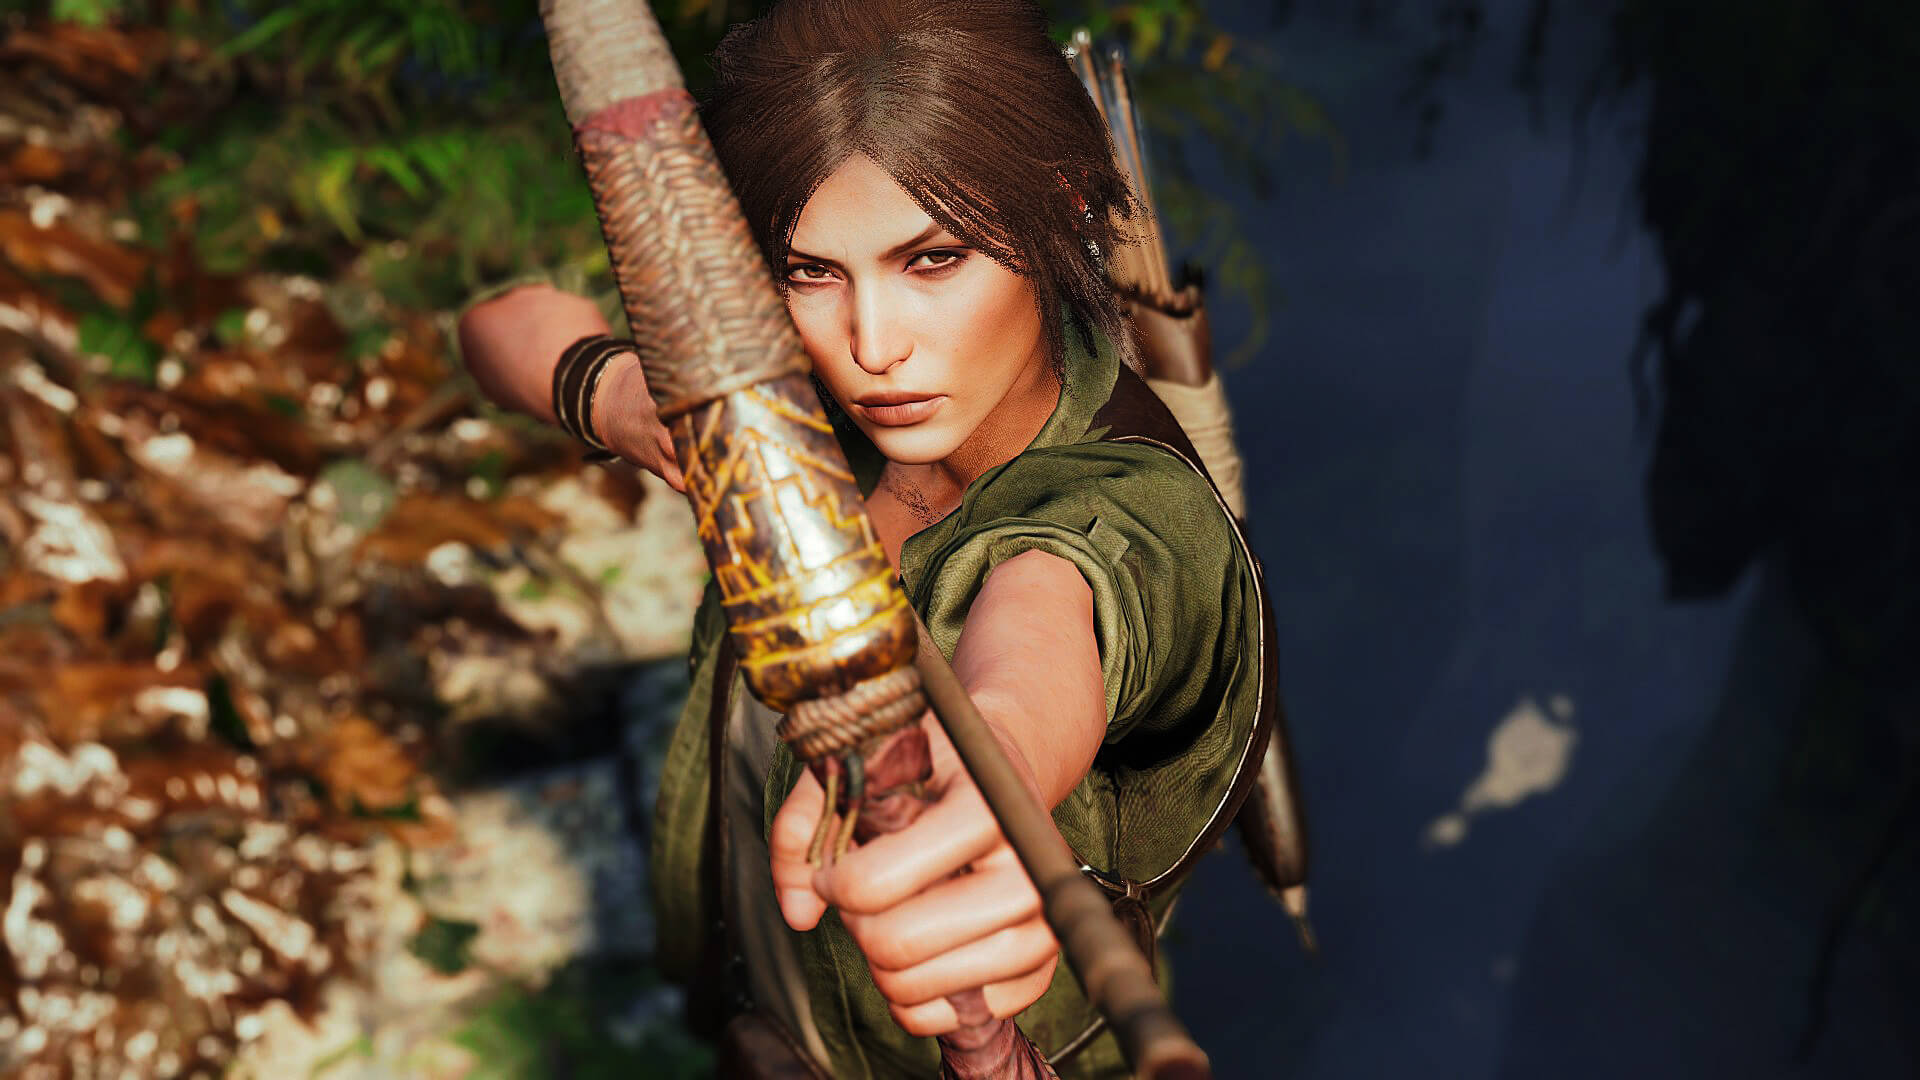 Rise Of The Tomb Raider Nude Mod Playthrough Ascsealpha CLOUDYX GIRL PICS